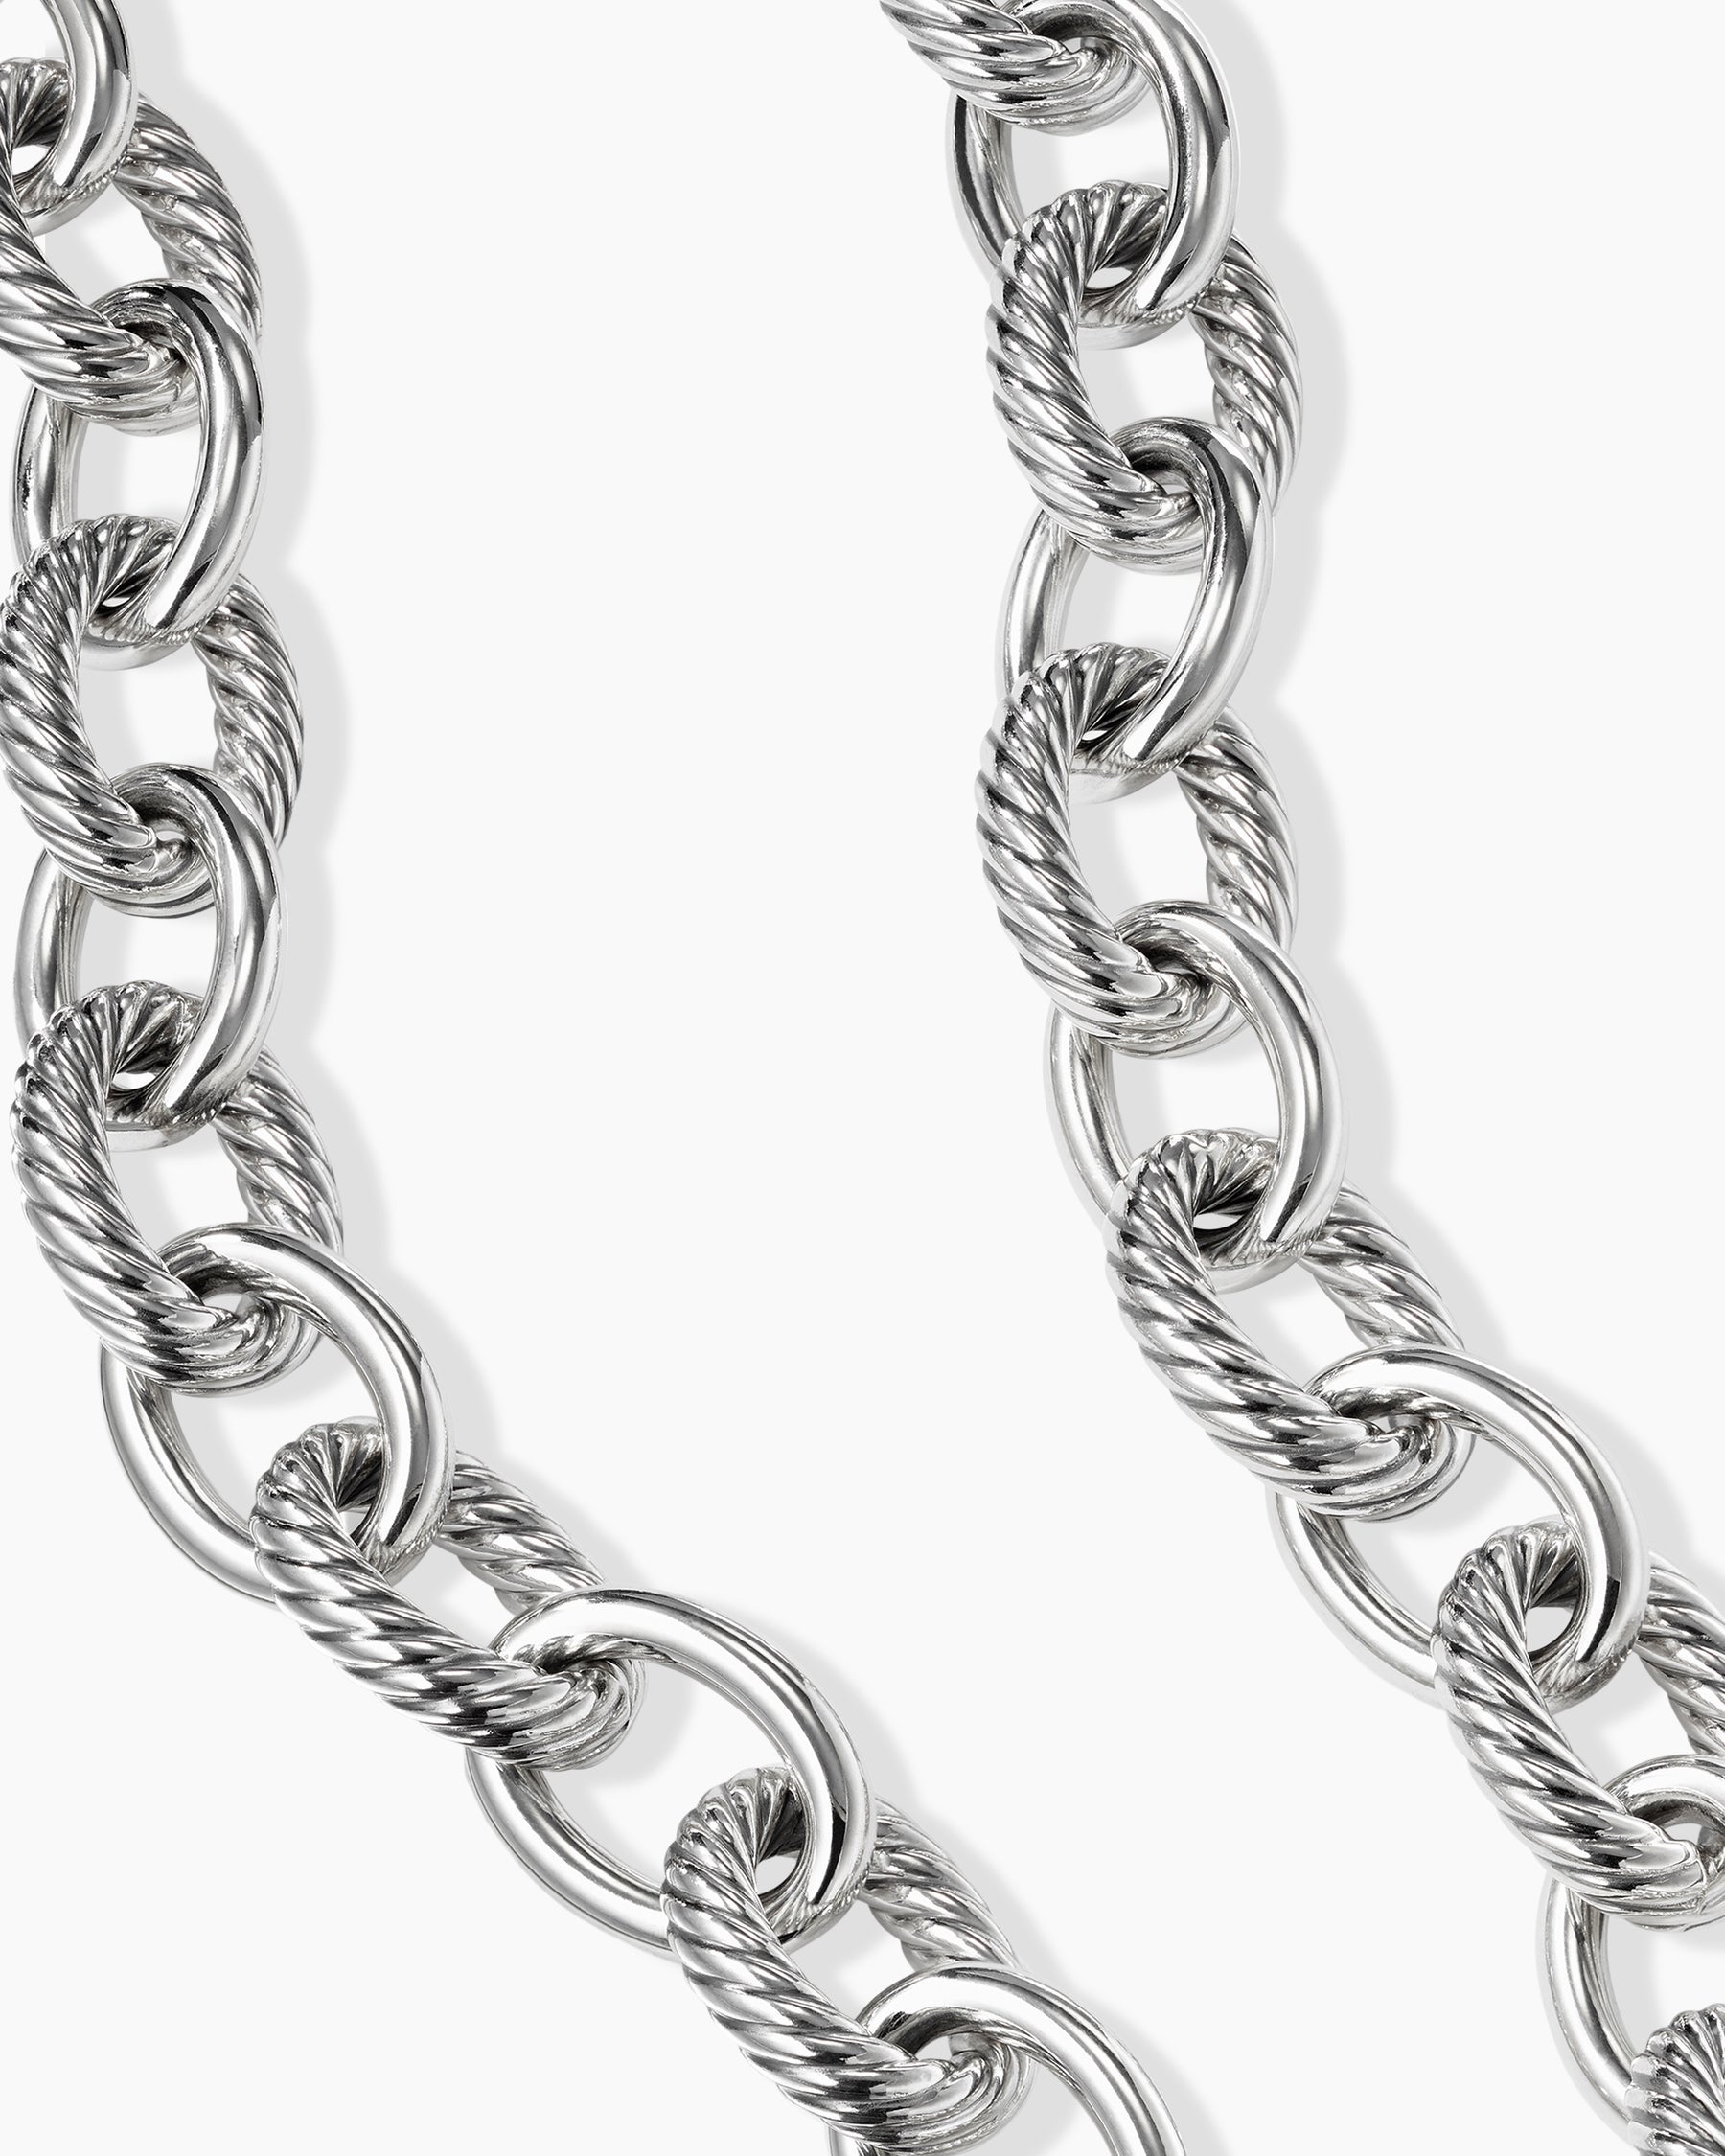 Oval Link Chain Necklace in Sterling Silver, 16mm